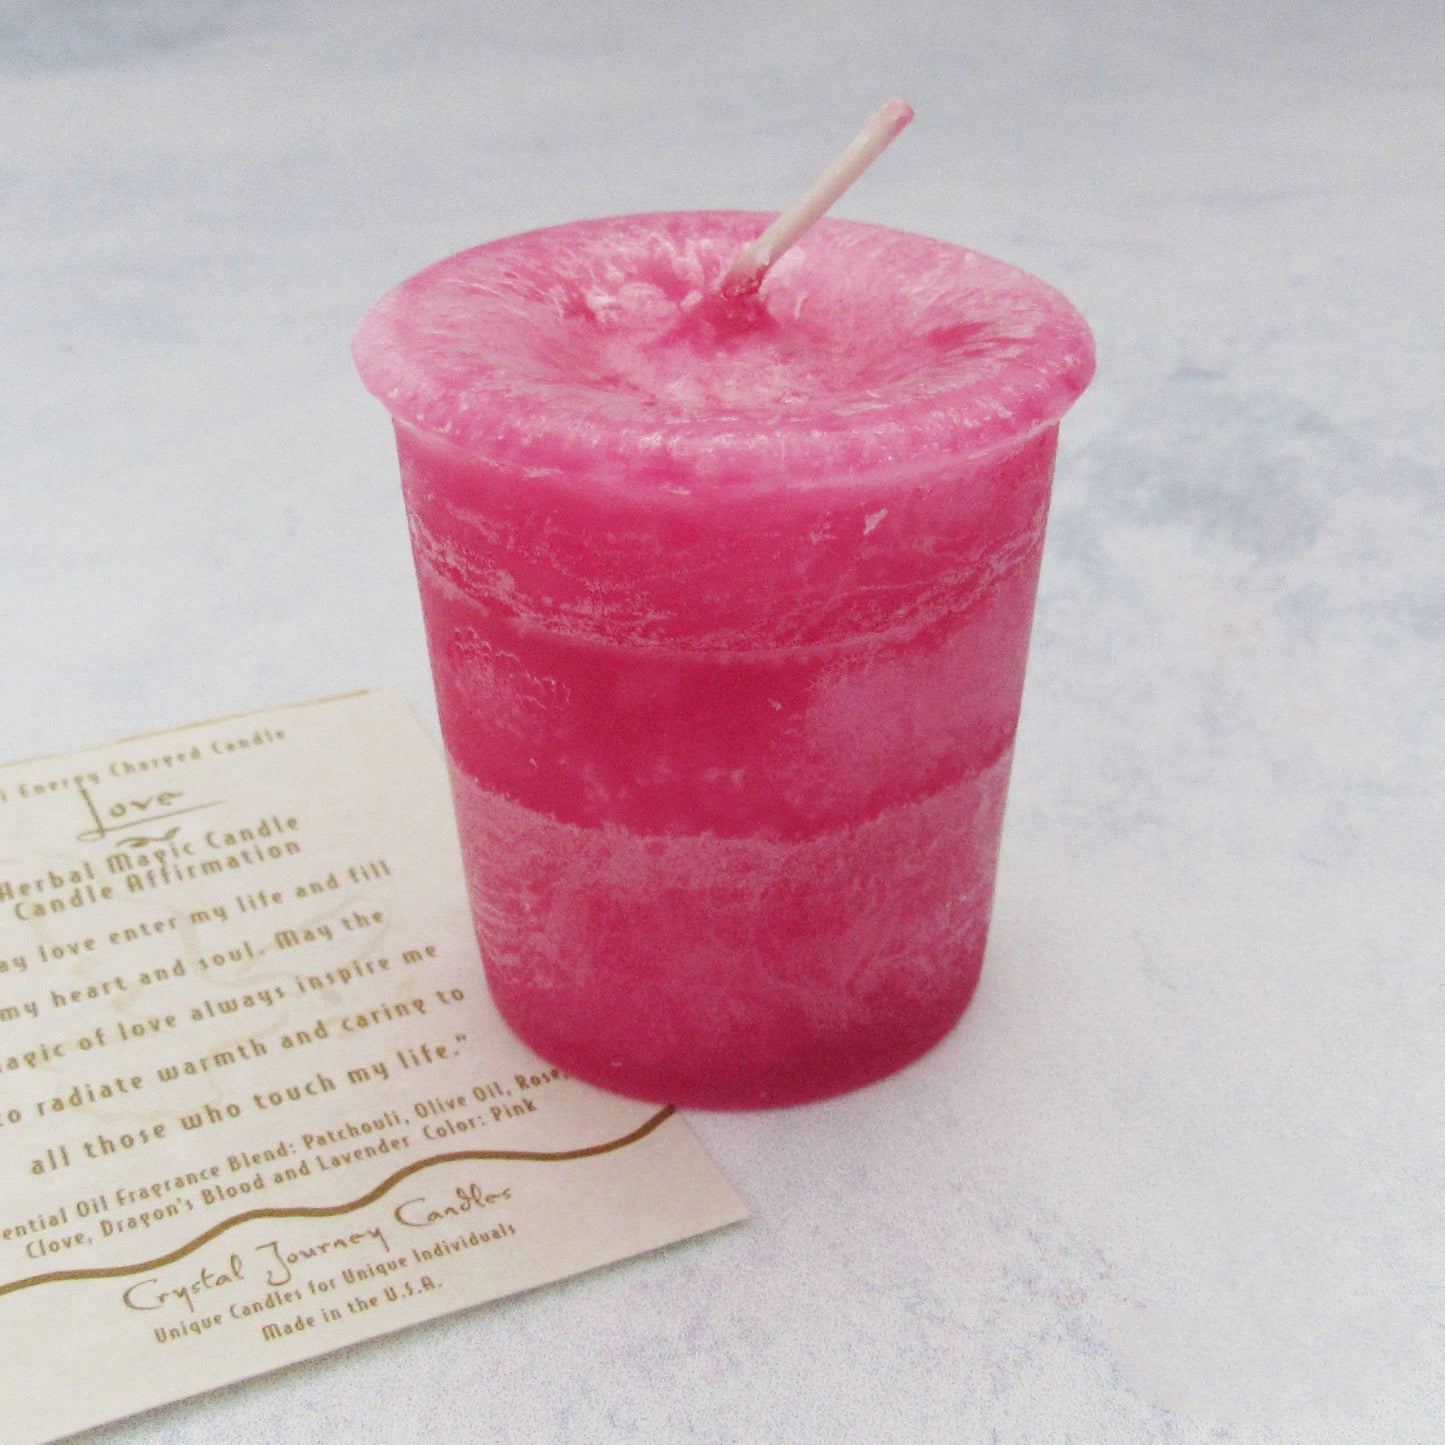 Love Votive Candle by Crystal Journey